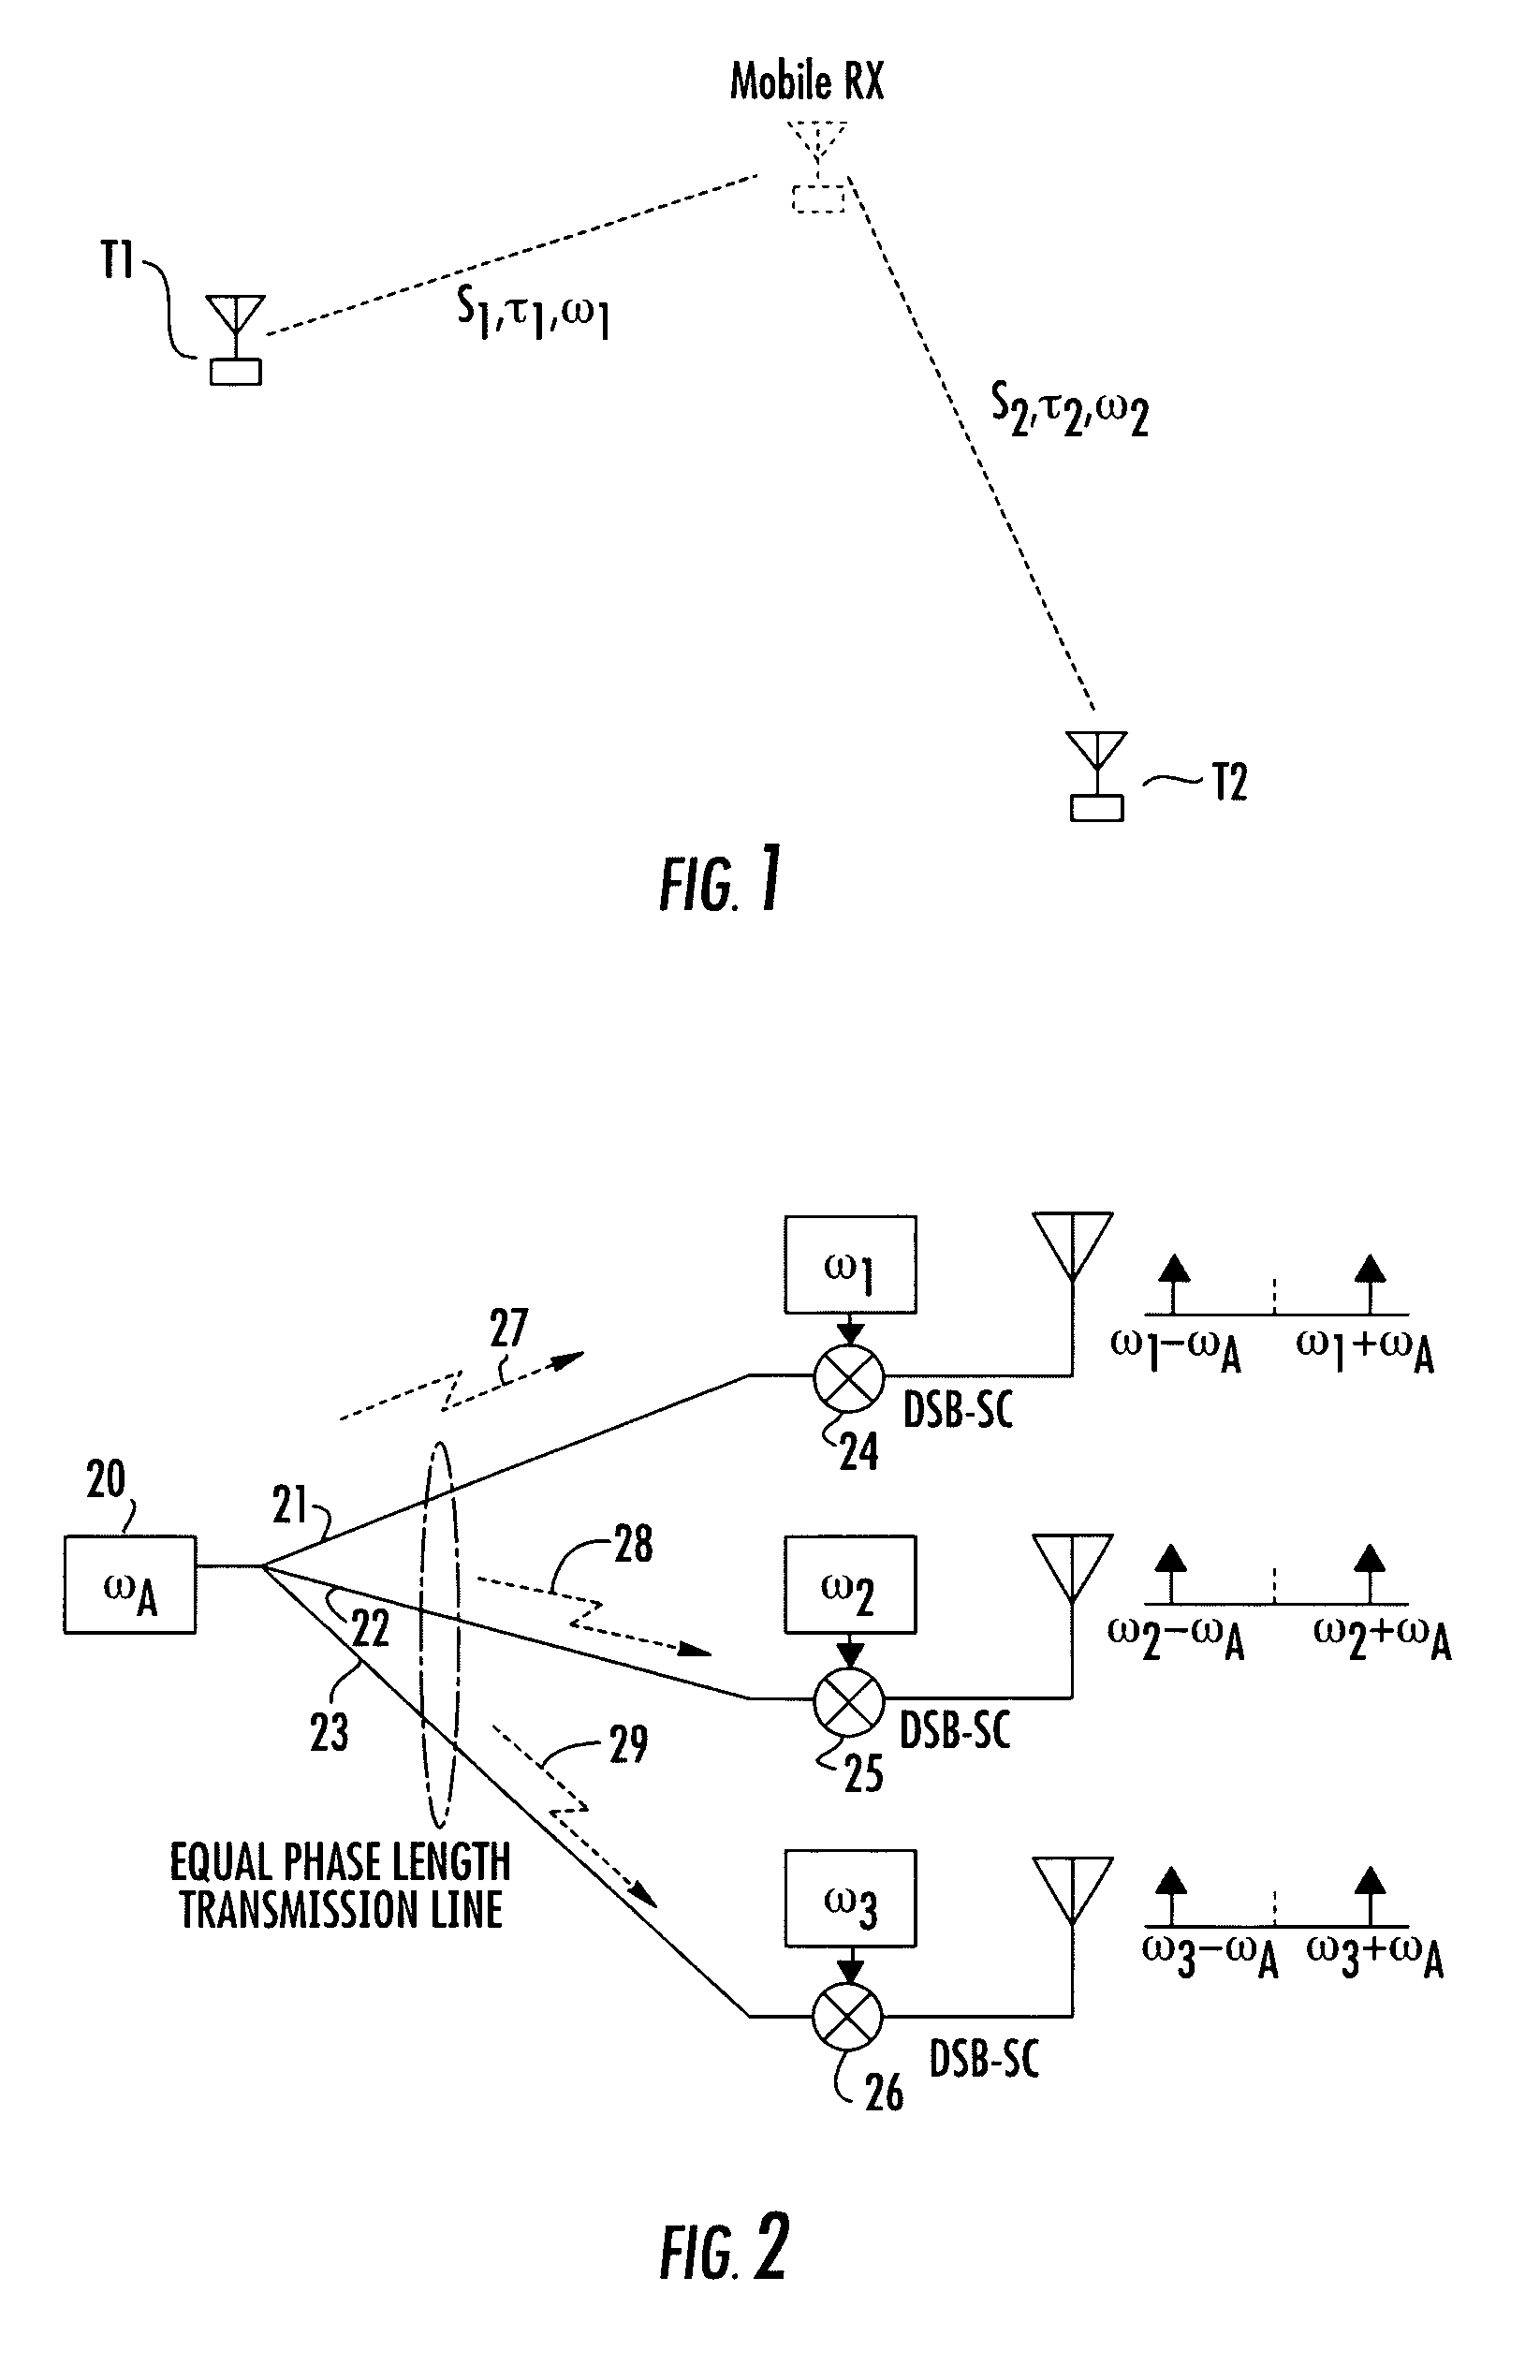 Method of locating object using phase differences among multiple frequency beacons transmitted from spaced apart transmitter sites